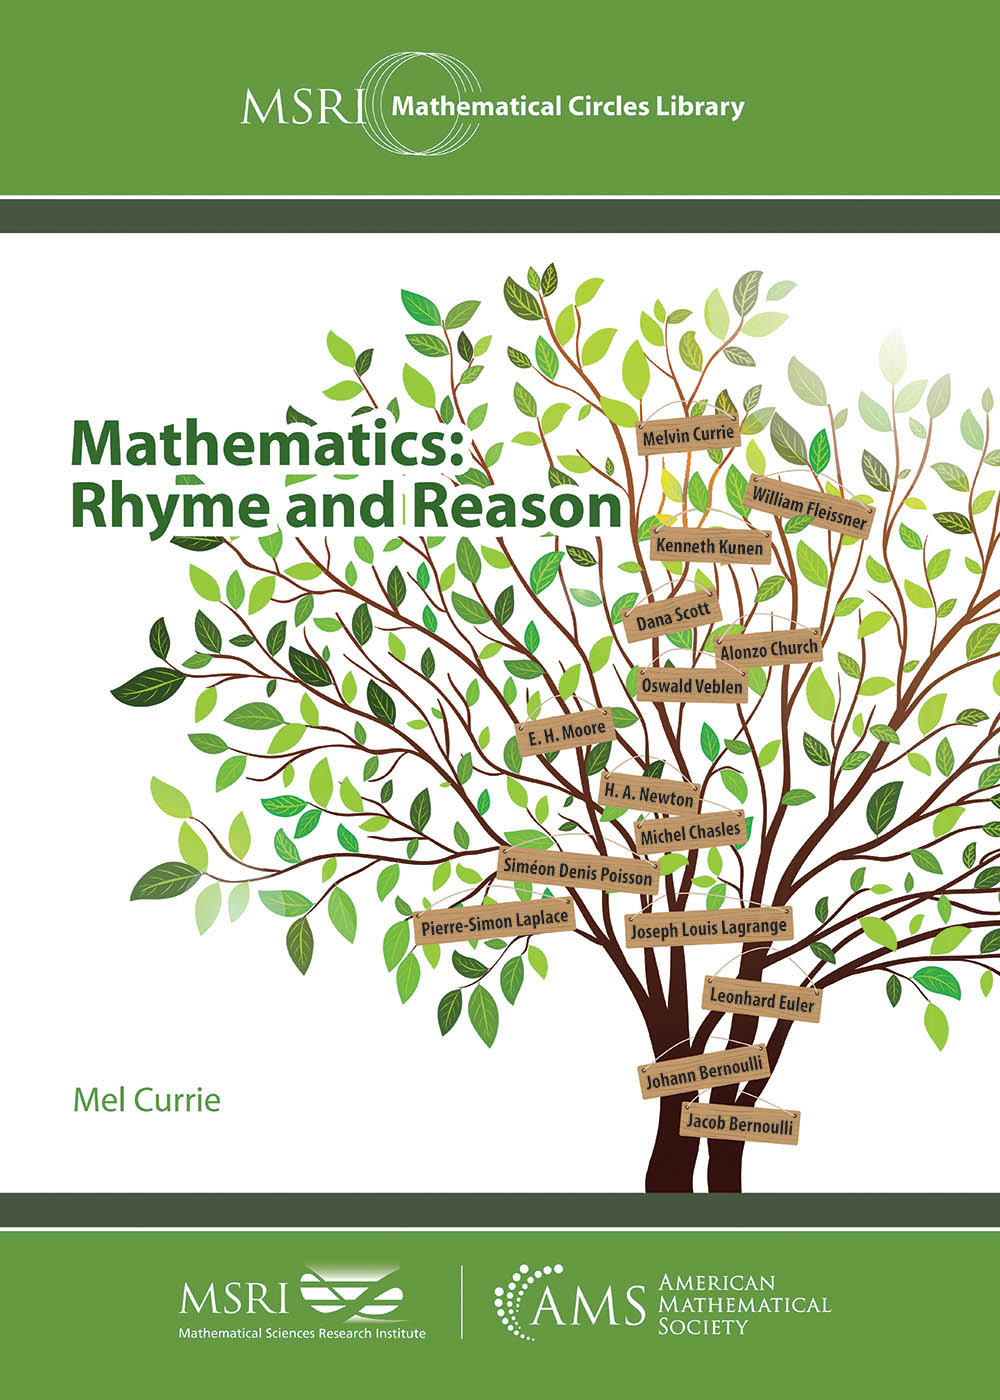 Image for "An ICERM Public Lecture: Mathematics: Rhyme and Reason"